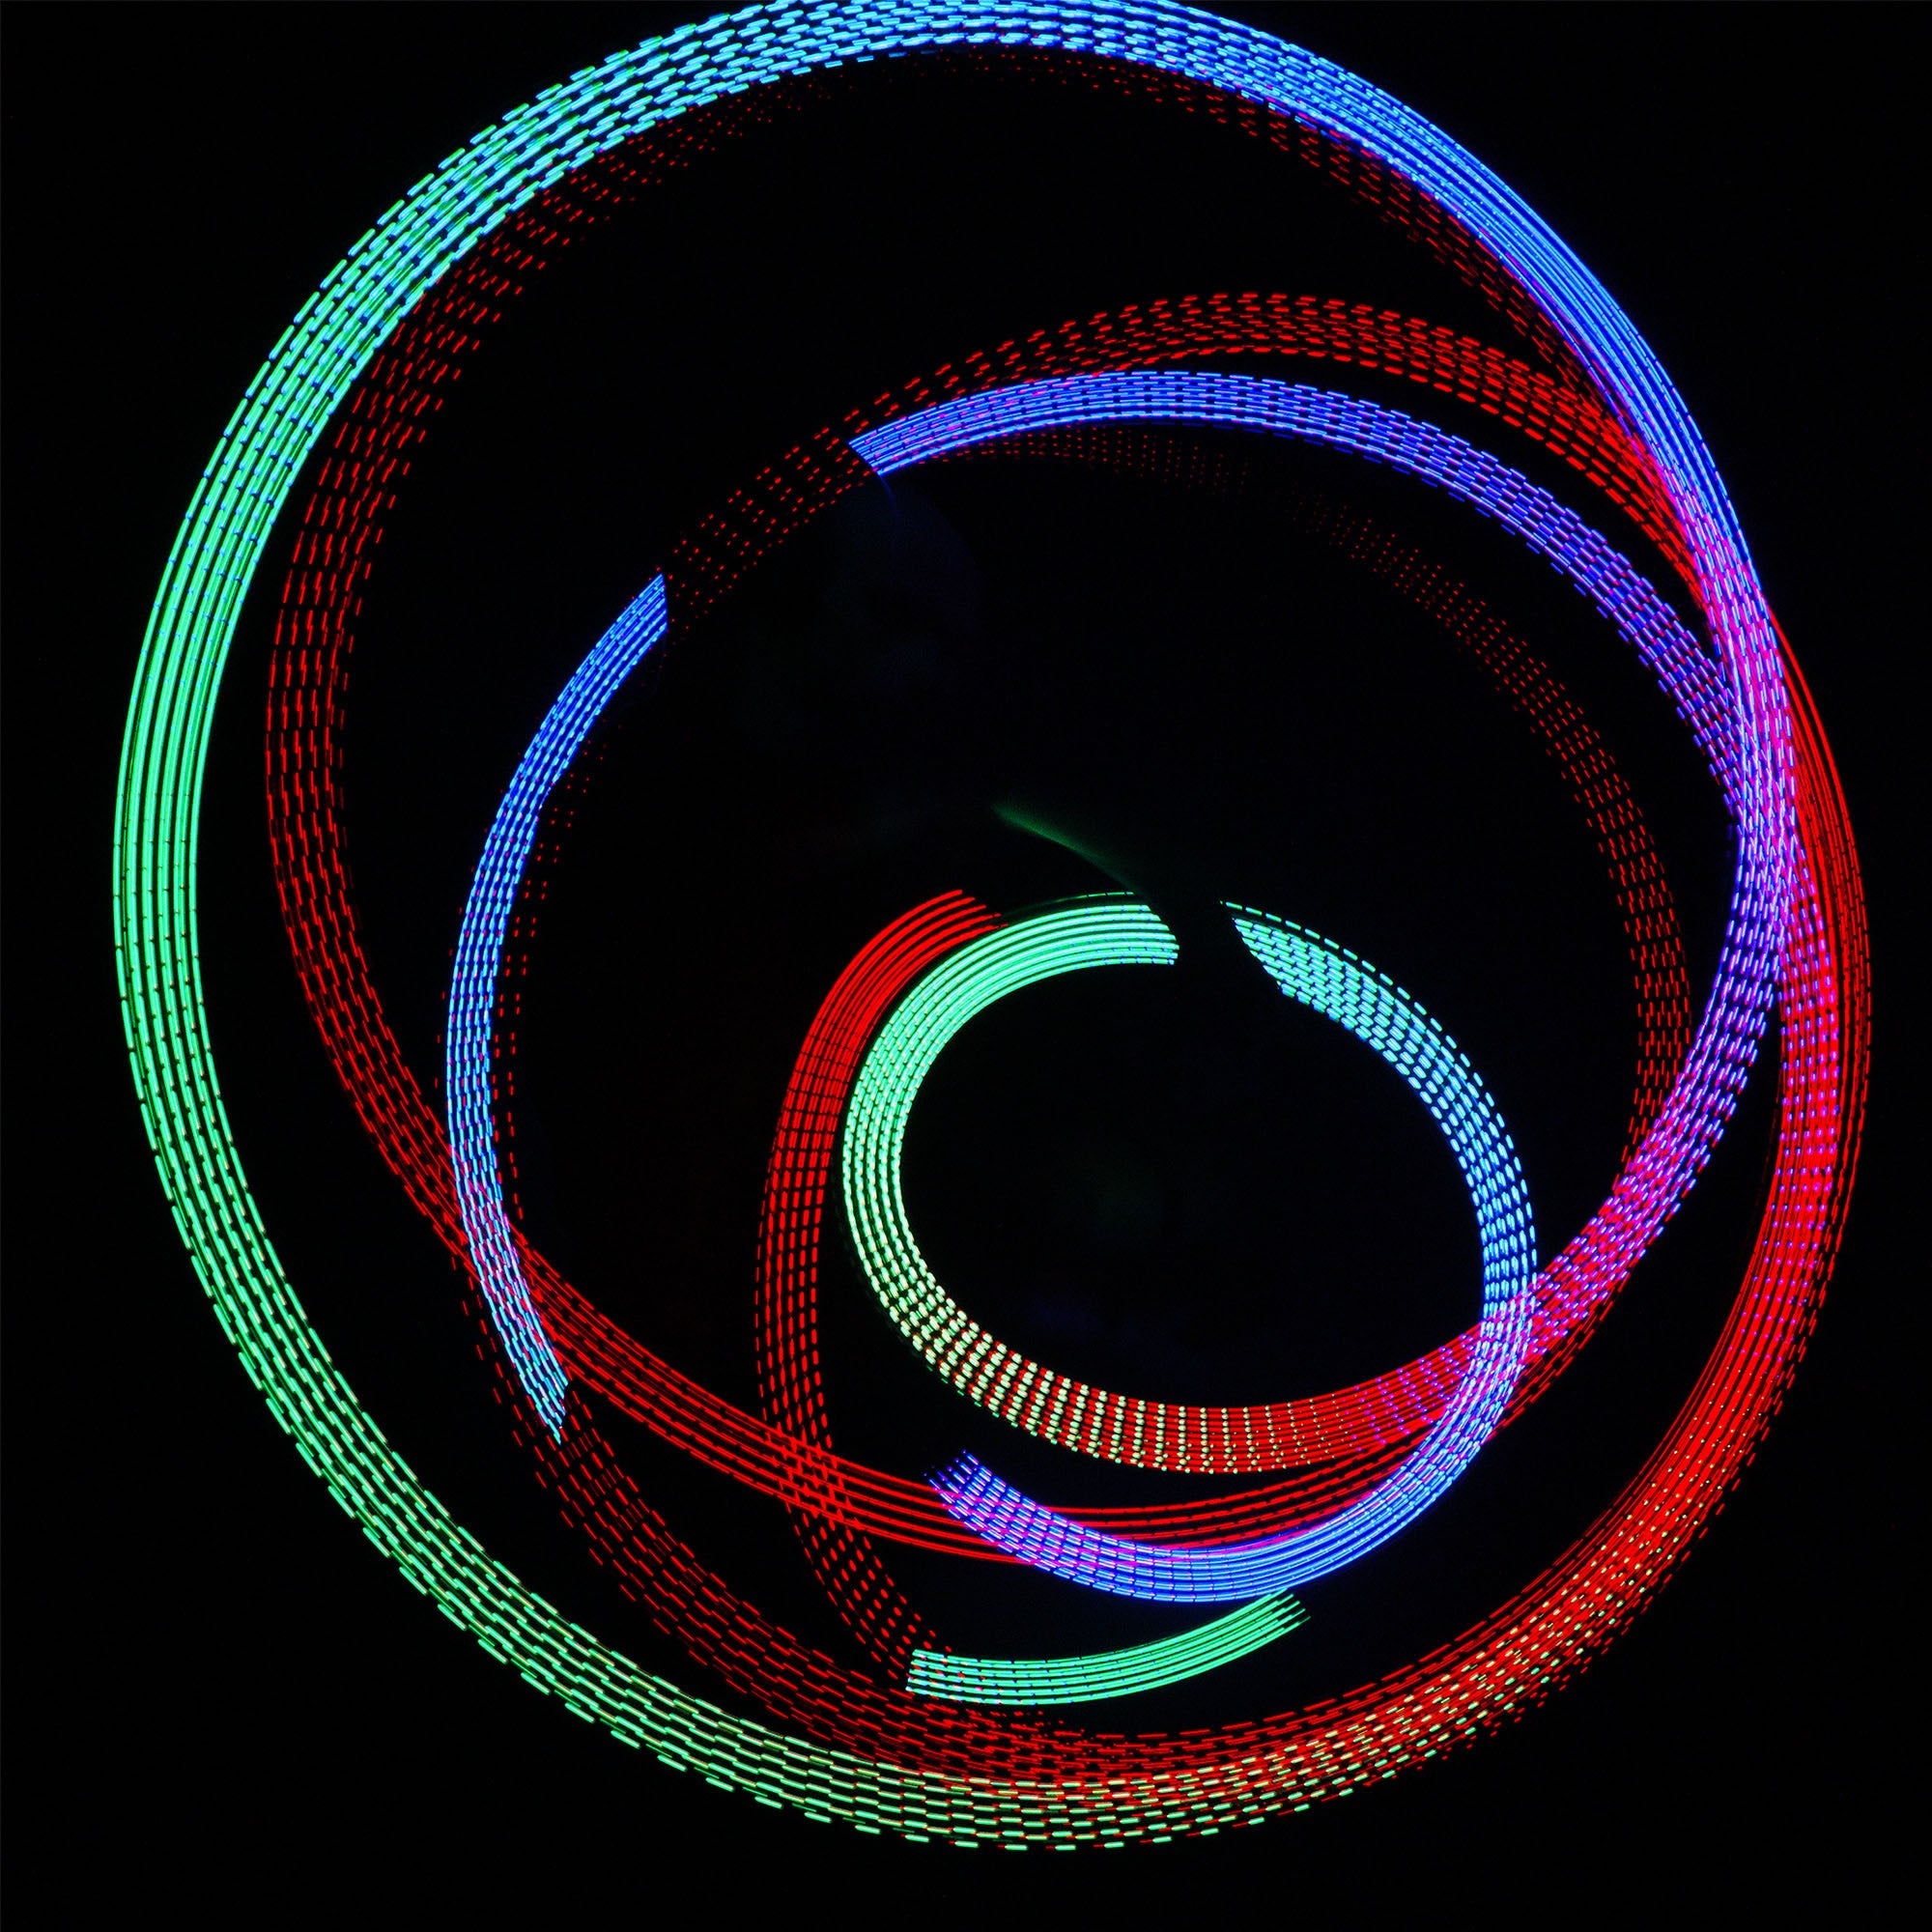 TriX 3.0 light trails with many colours.